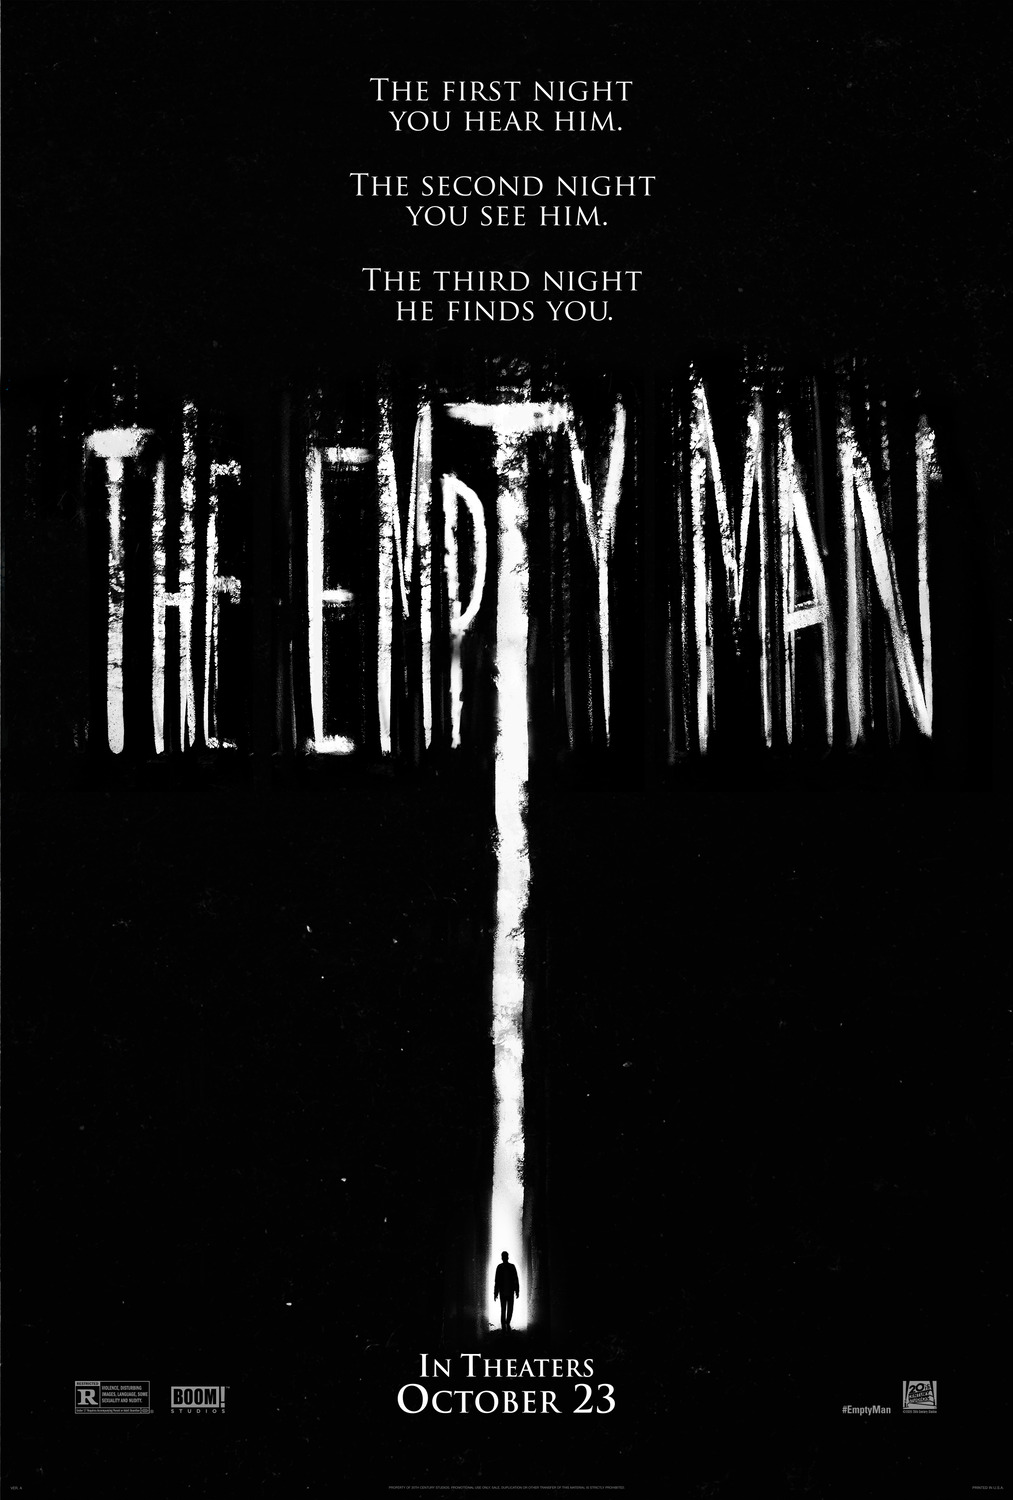 Extra Large Movie Poster Image for The Empty Man 